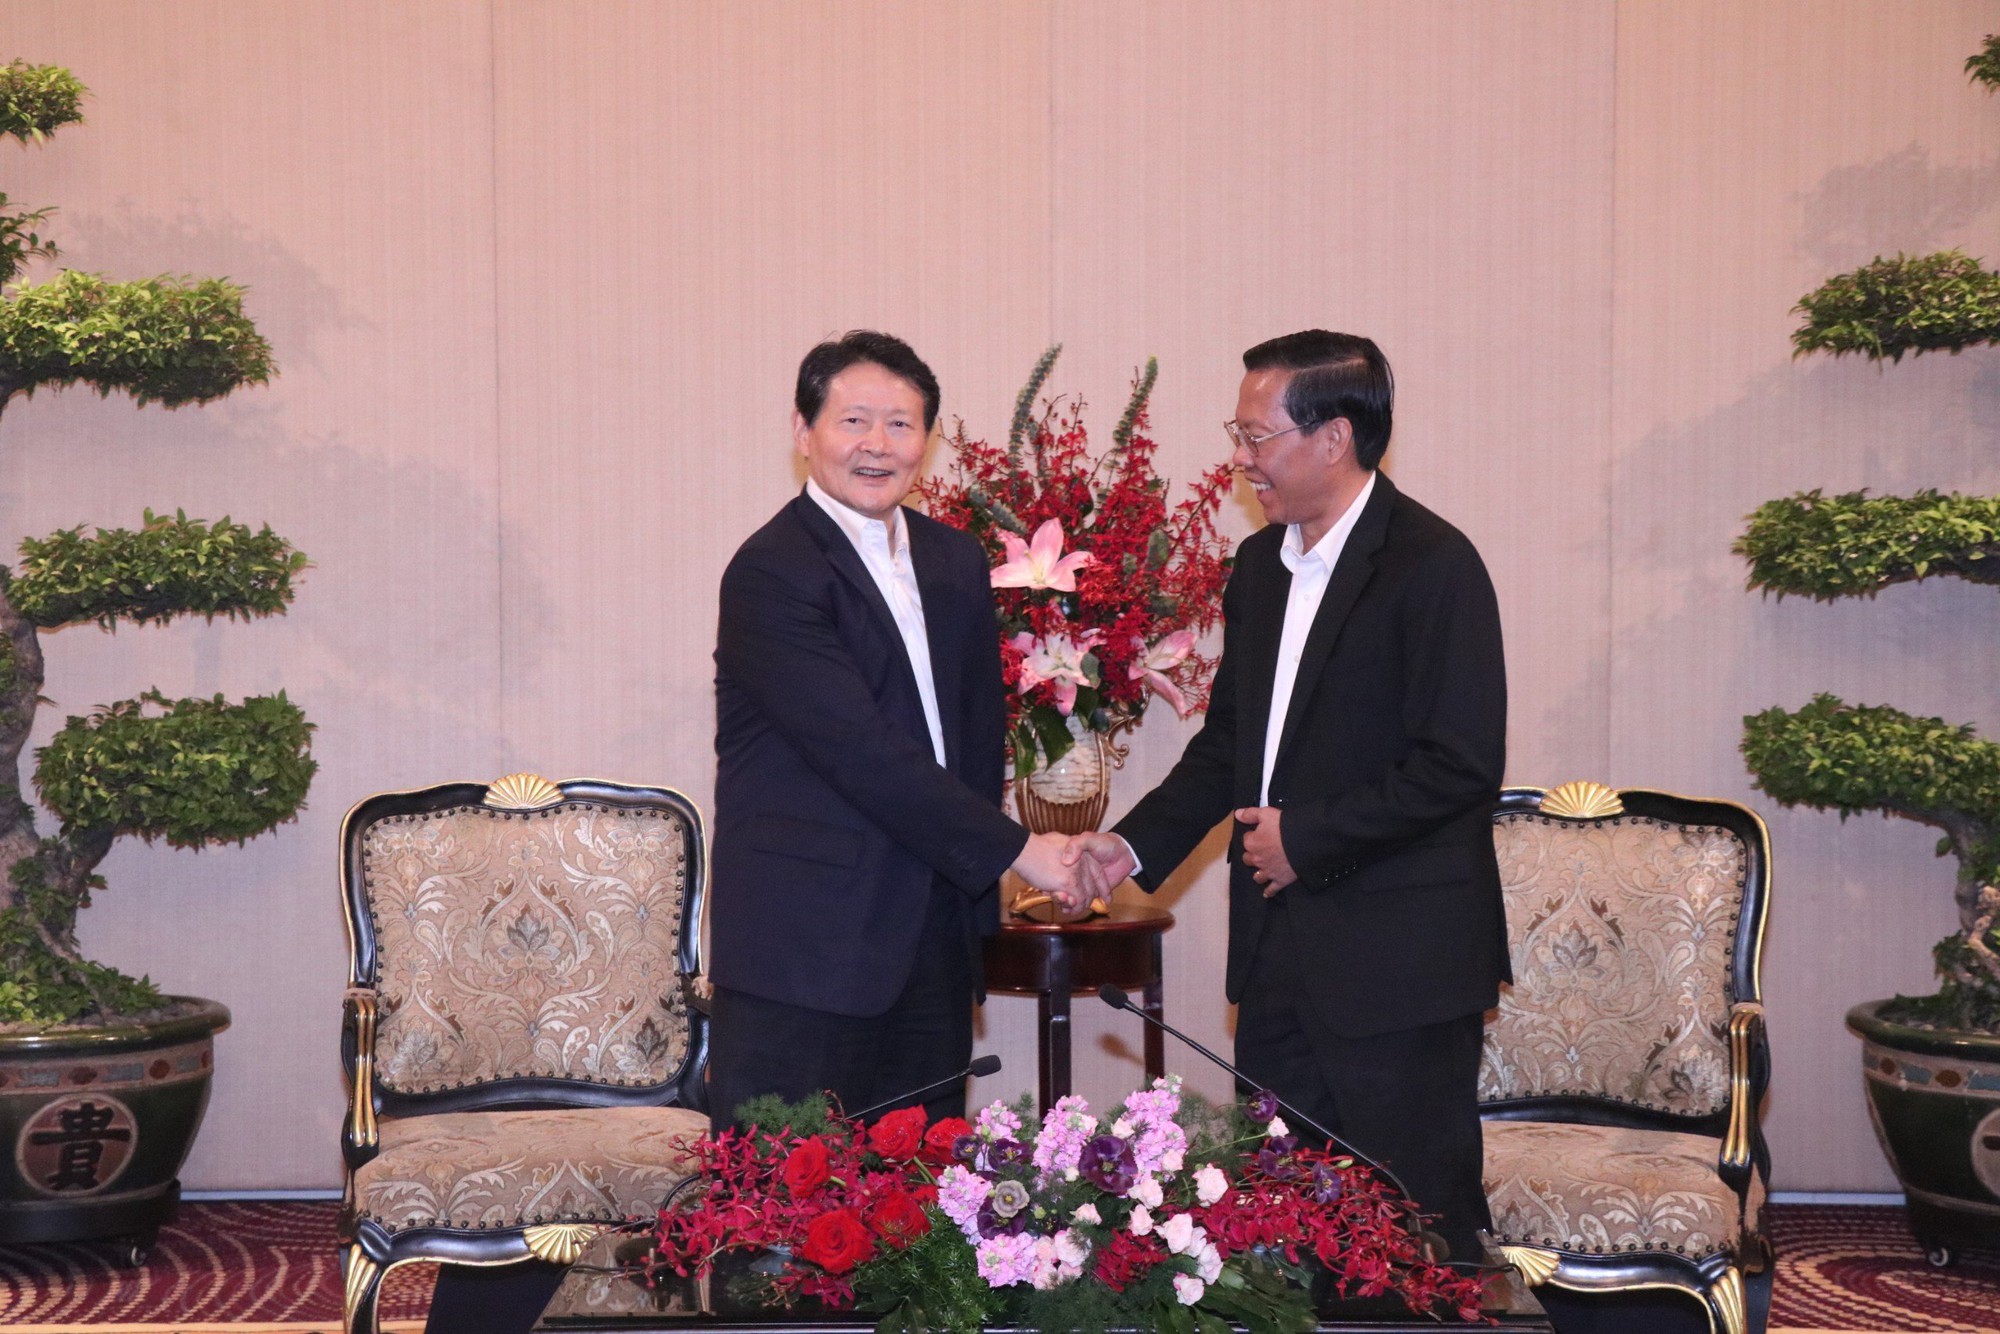 Ho Chi Minh City has close economic ties with its Chinese partners - photo 2.